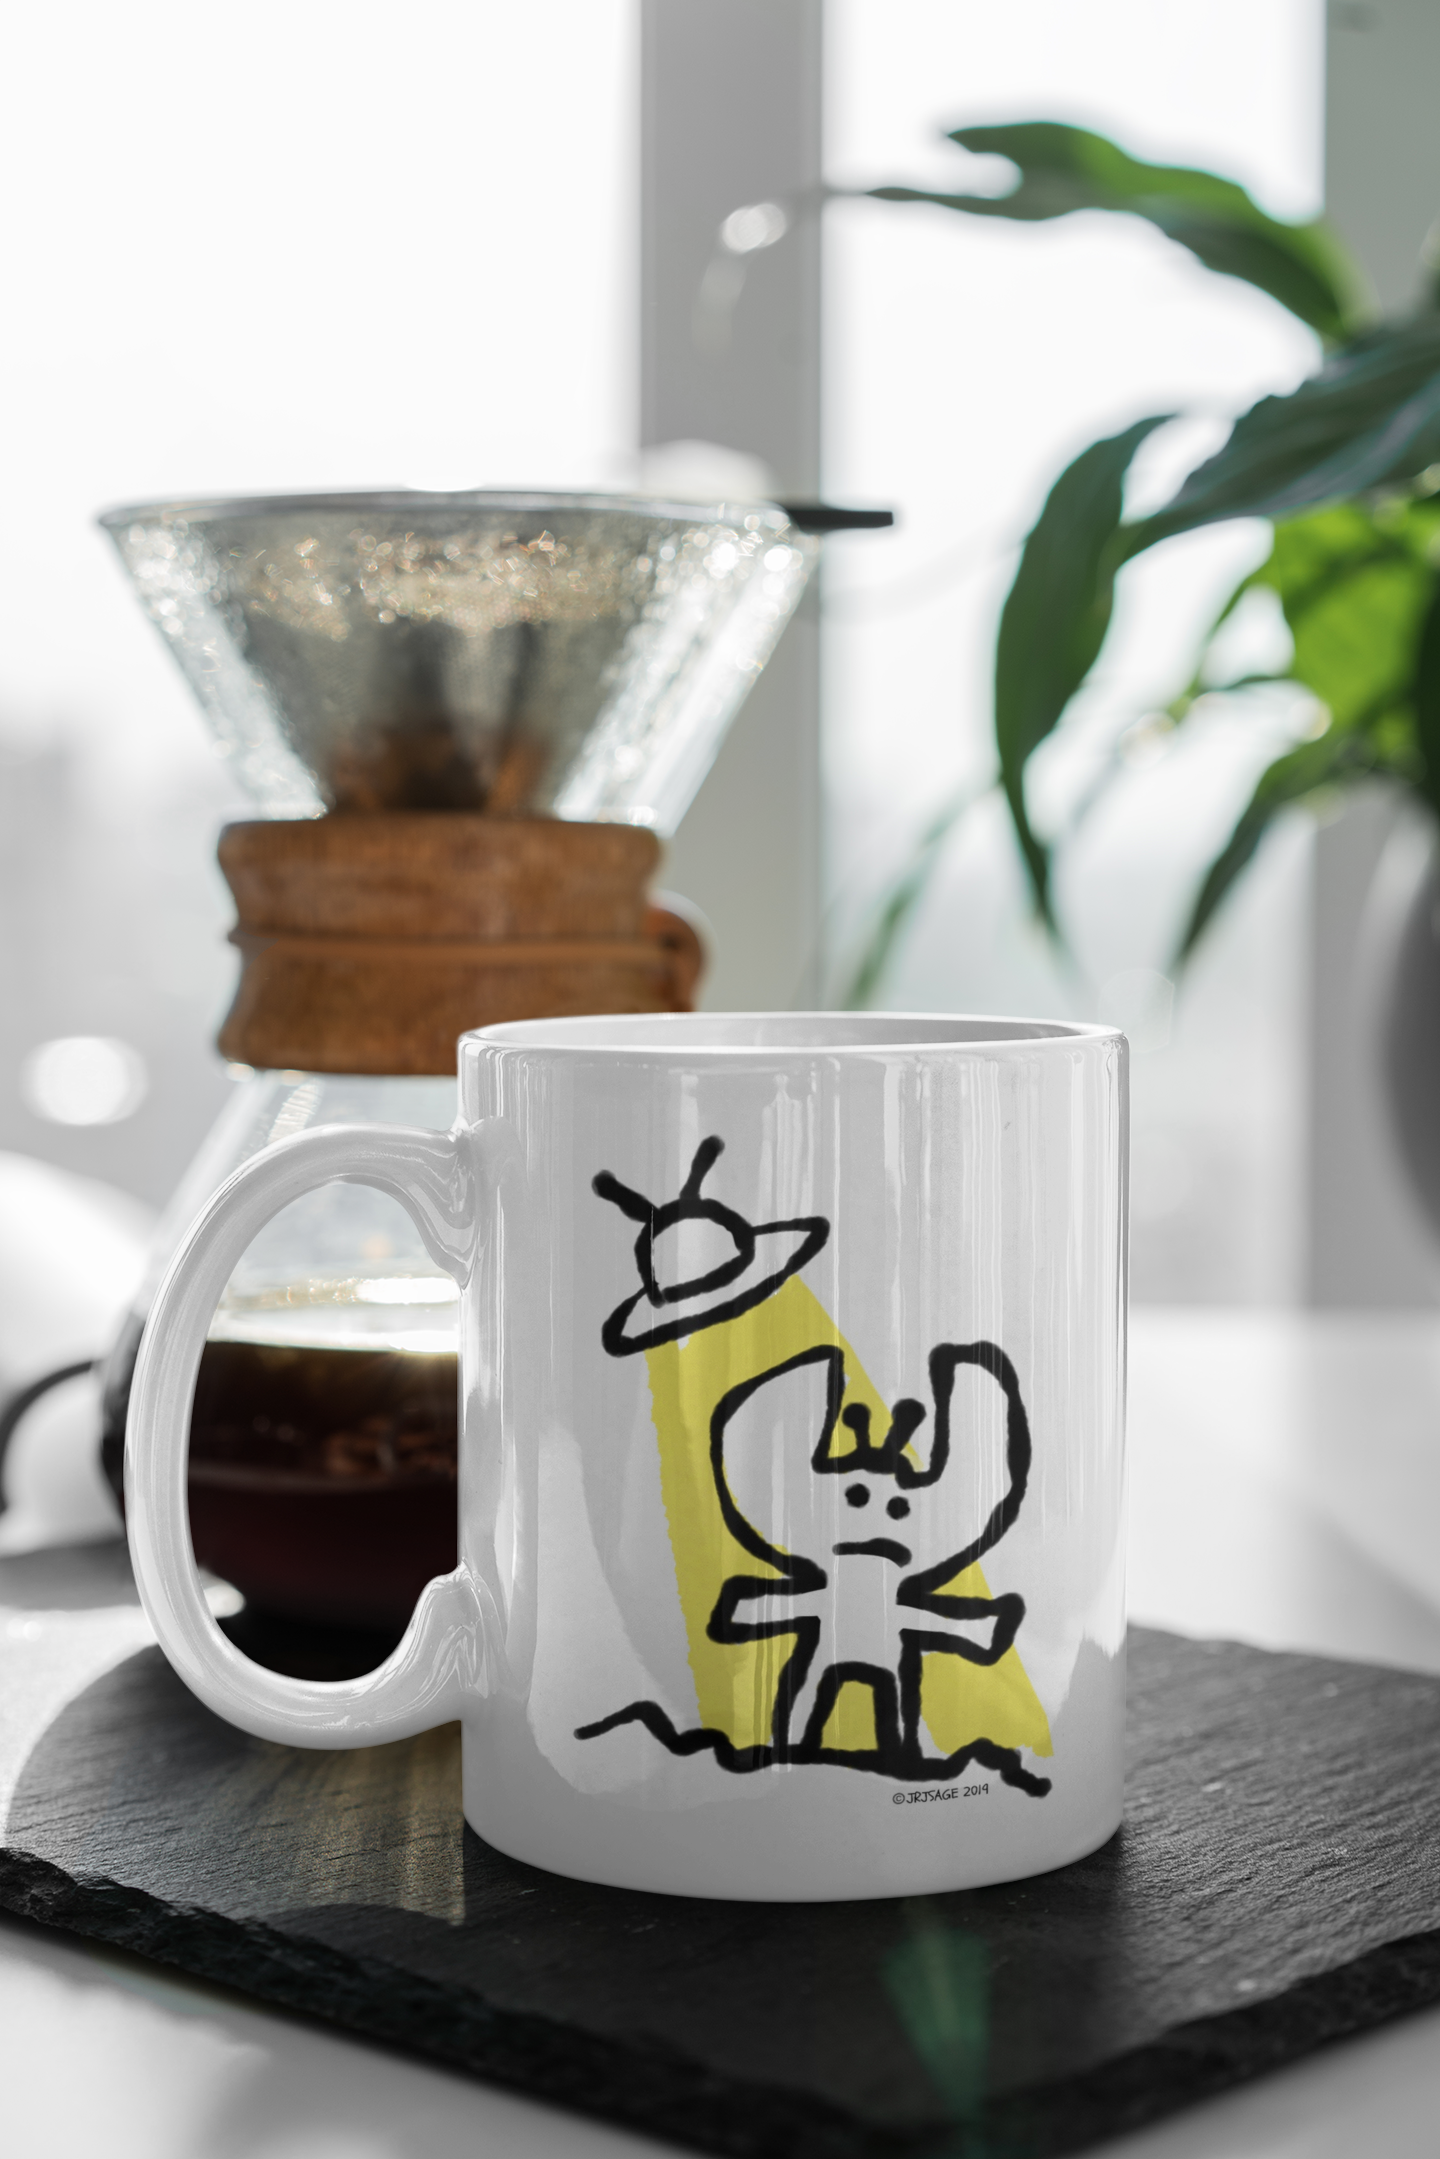 A White Ceramic Hector and Bone Mug with an illustration of a cute Alien and his Spaceship